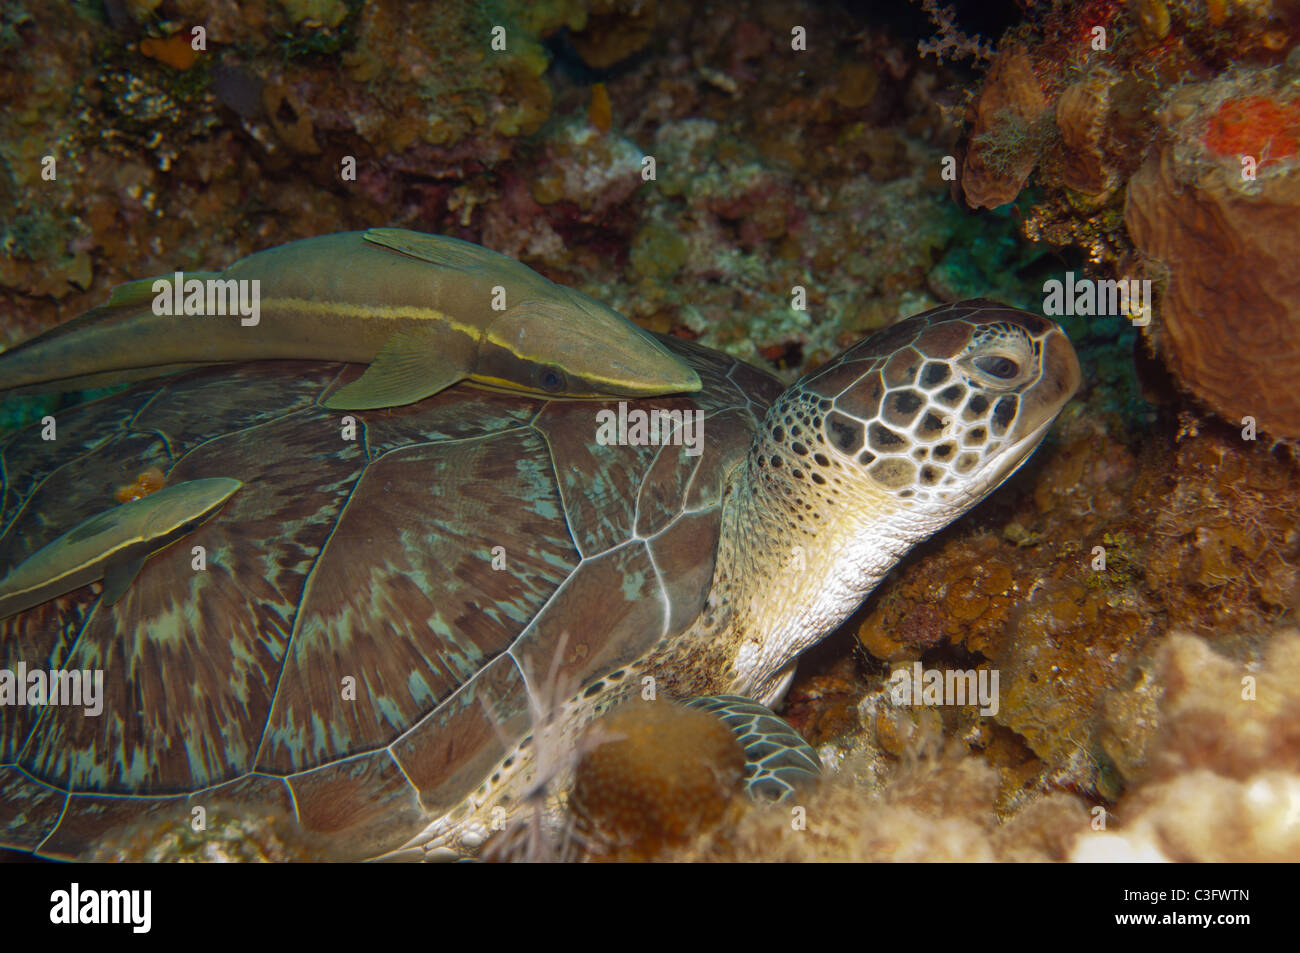 White suckerfish can often be found hitchhiking on the back of larger marine organisms such as this green sea turtle. Stock Photo